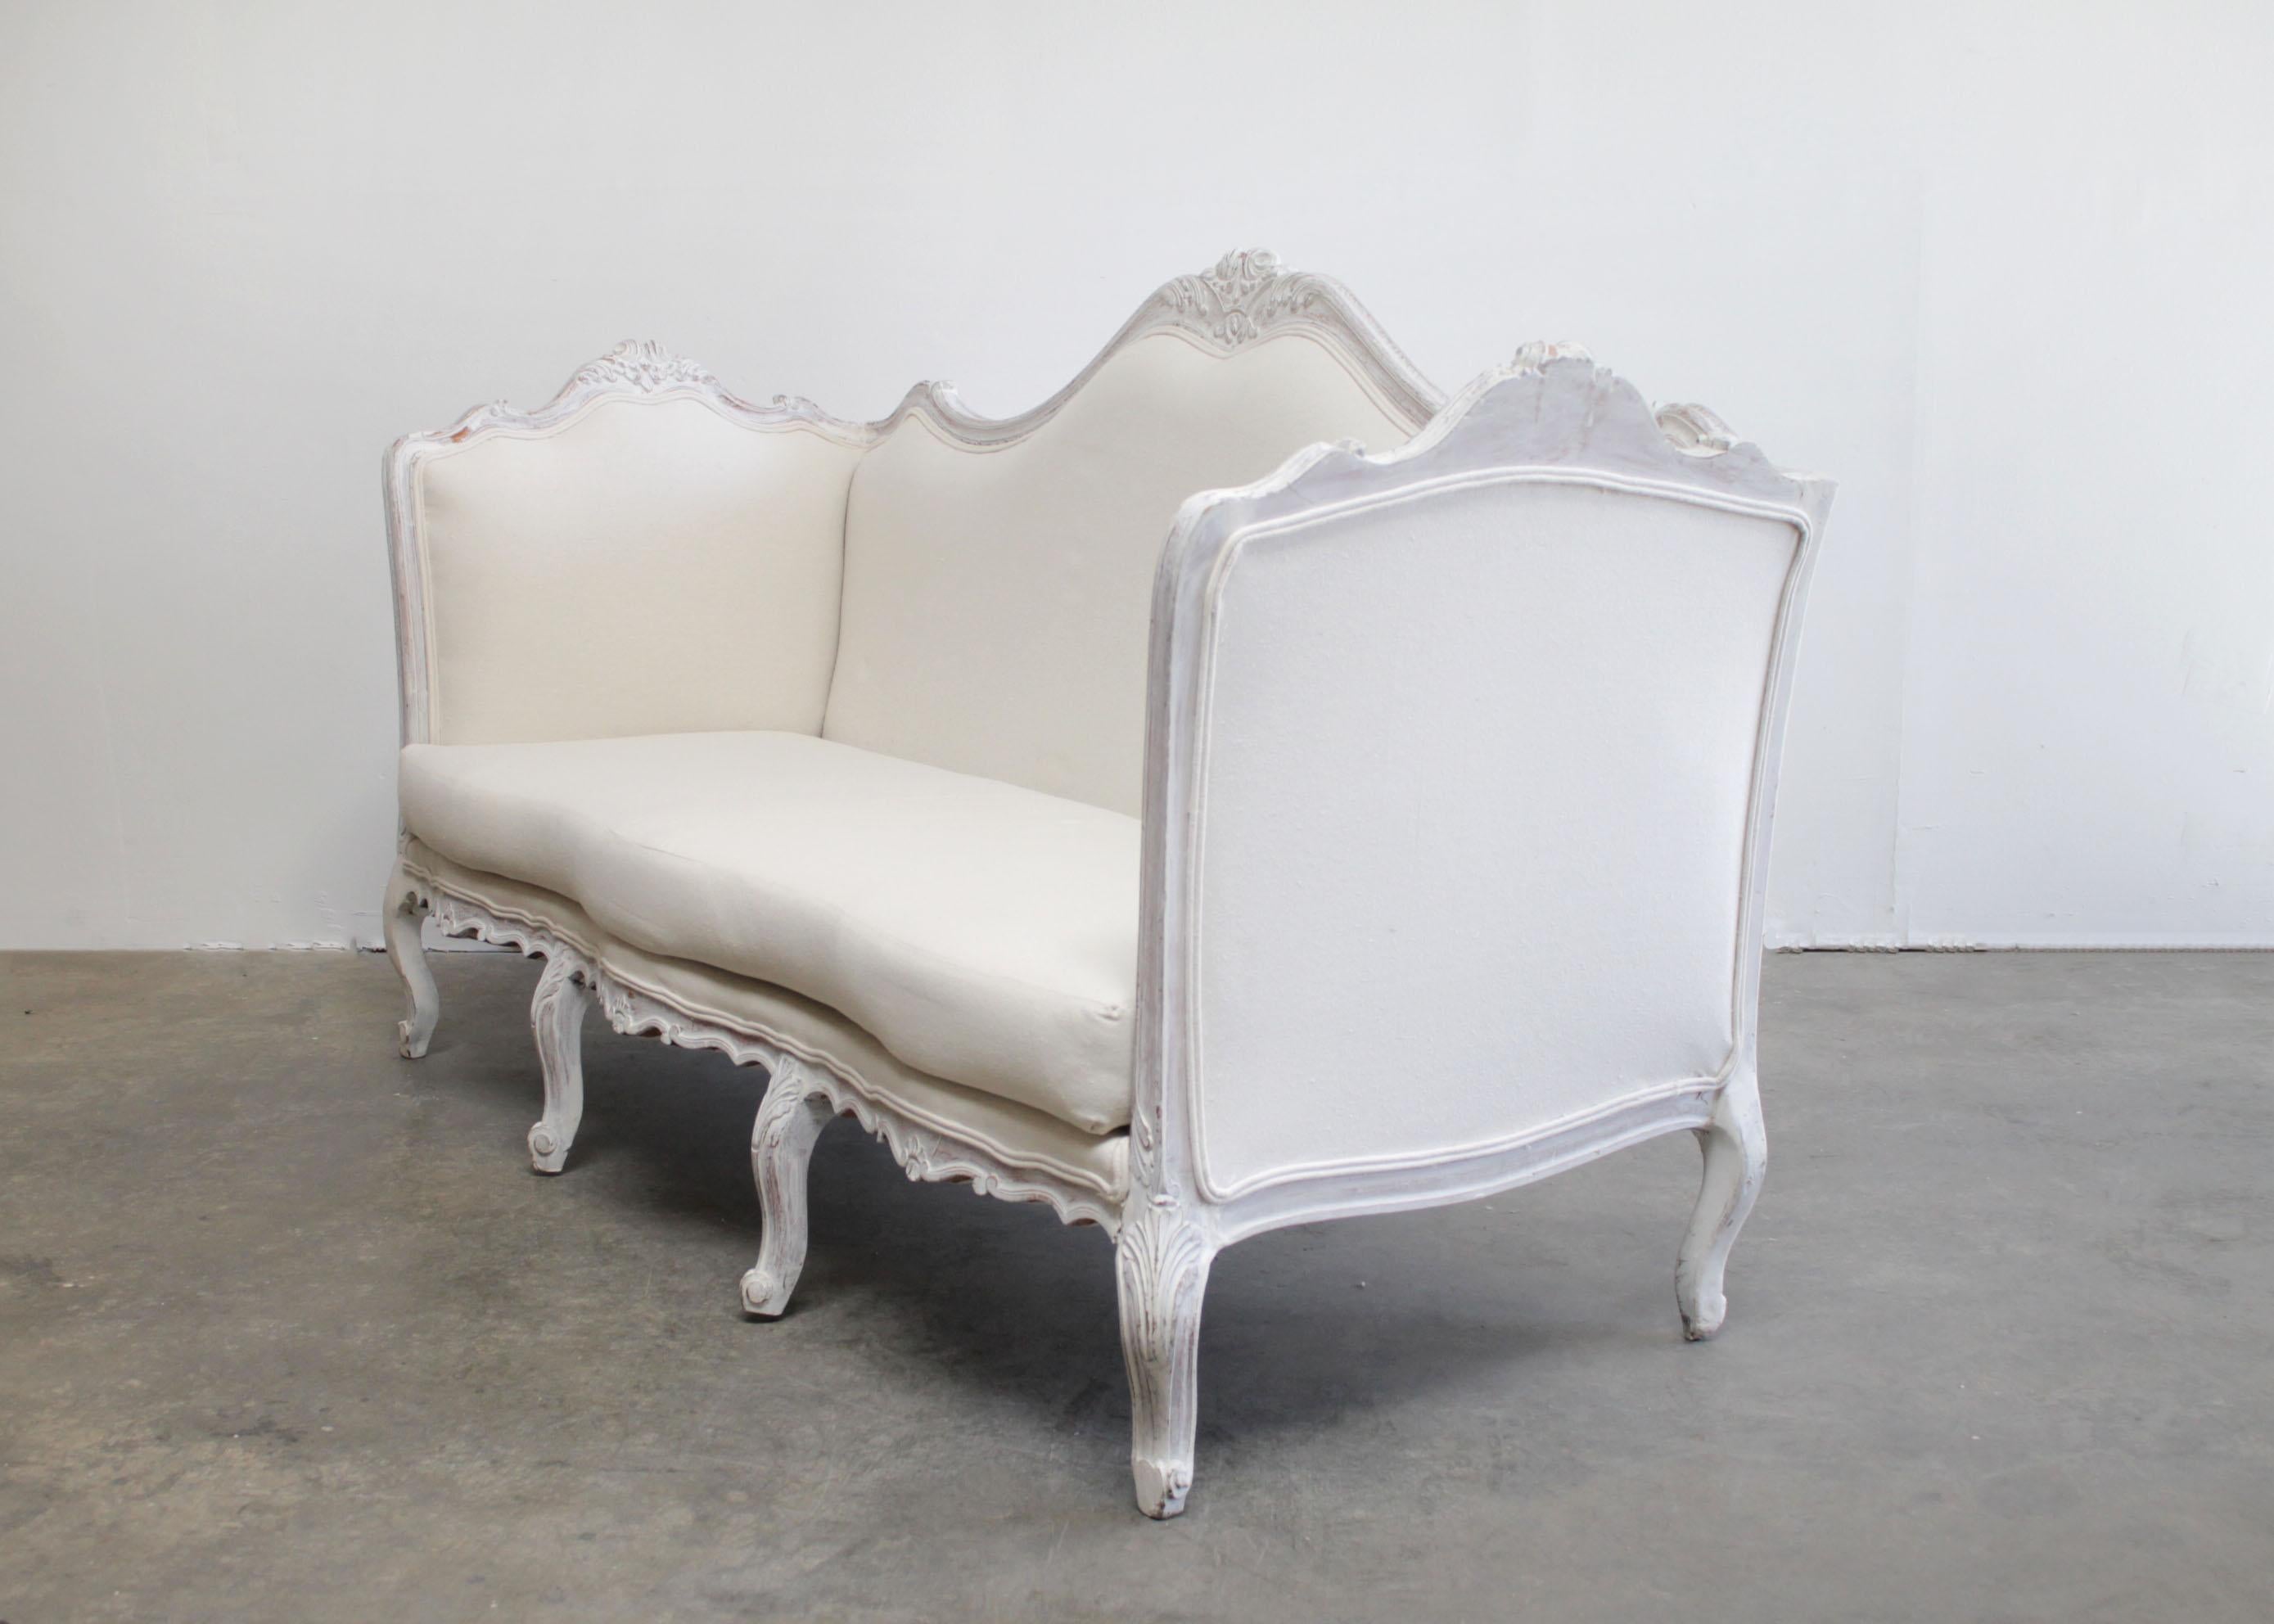 Antique French Louis XV style painted and upholstered sofa.
Beautiful painted sofa in soft white with subtle antique distressing.
An oyster grey hue, with wood flecks peeking through the paint.
Soft rounded scrolls, and hand carved flowers, and